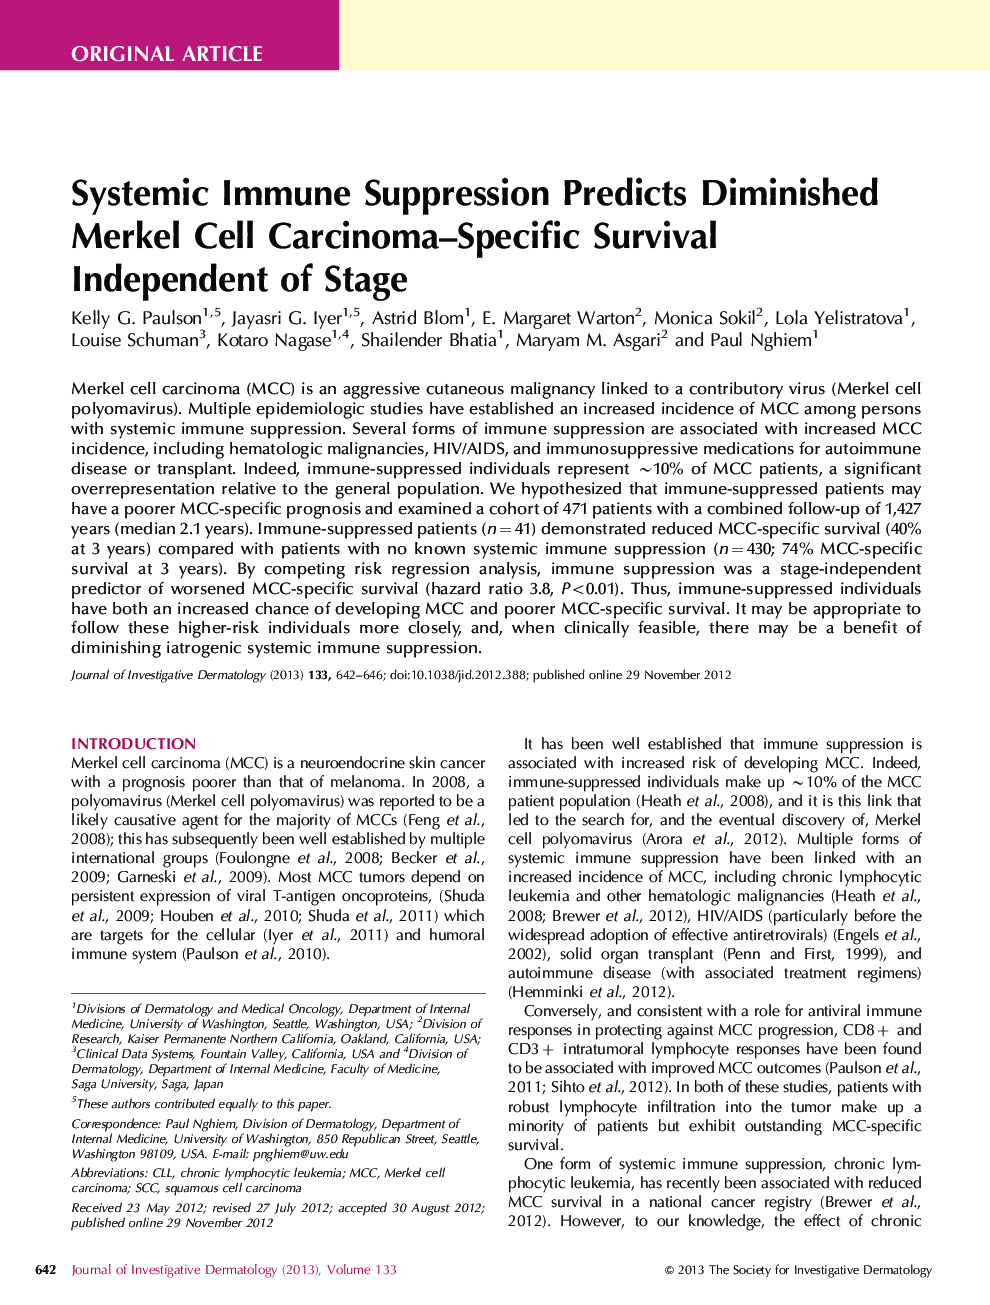 Systemic Immune Suppression Predicts Diminished Merkel Cell Carcinoma-Specific Survival Independent of Stage